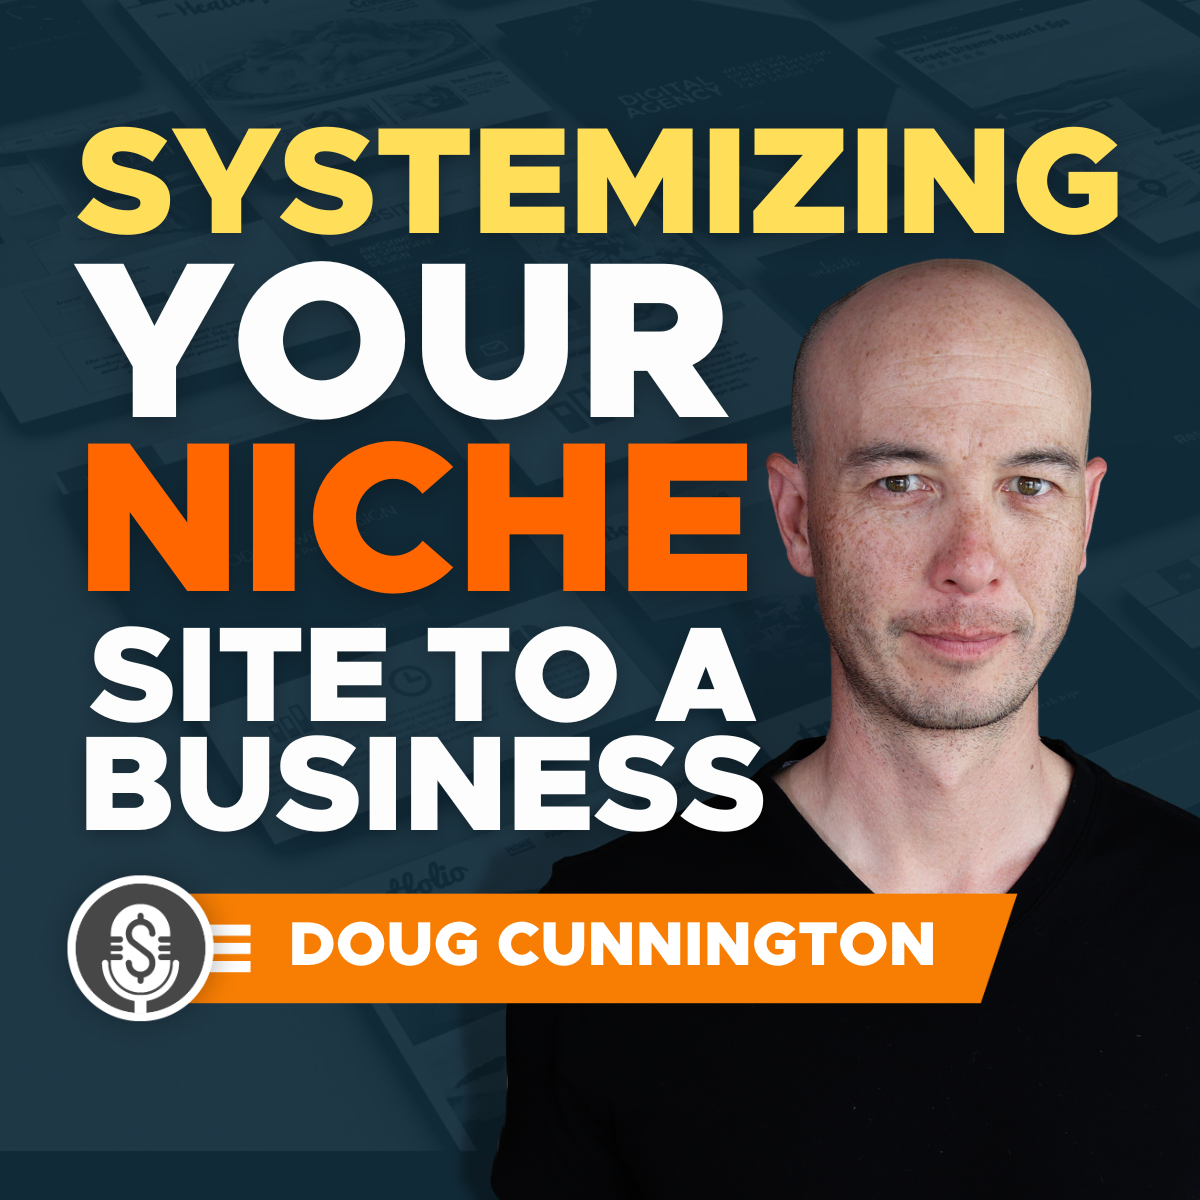 Doug Cunnington on Systemizing Processes and Spring Cleaning Your Business in 2023